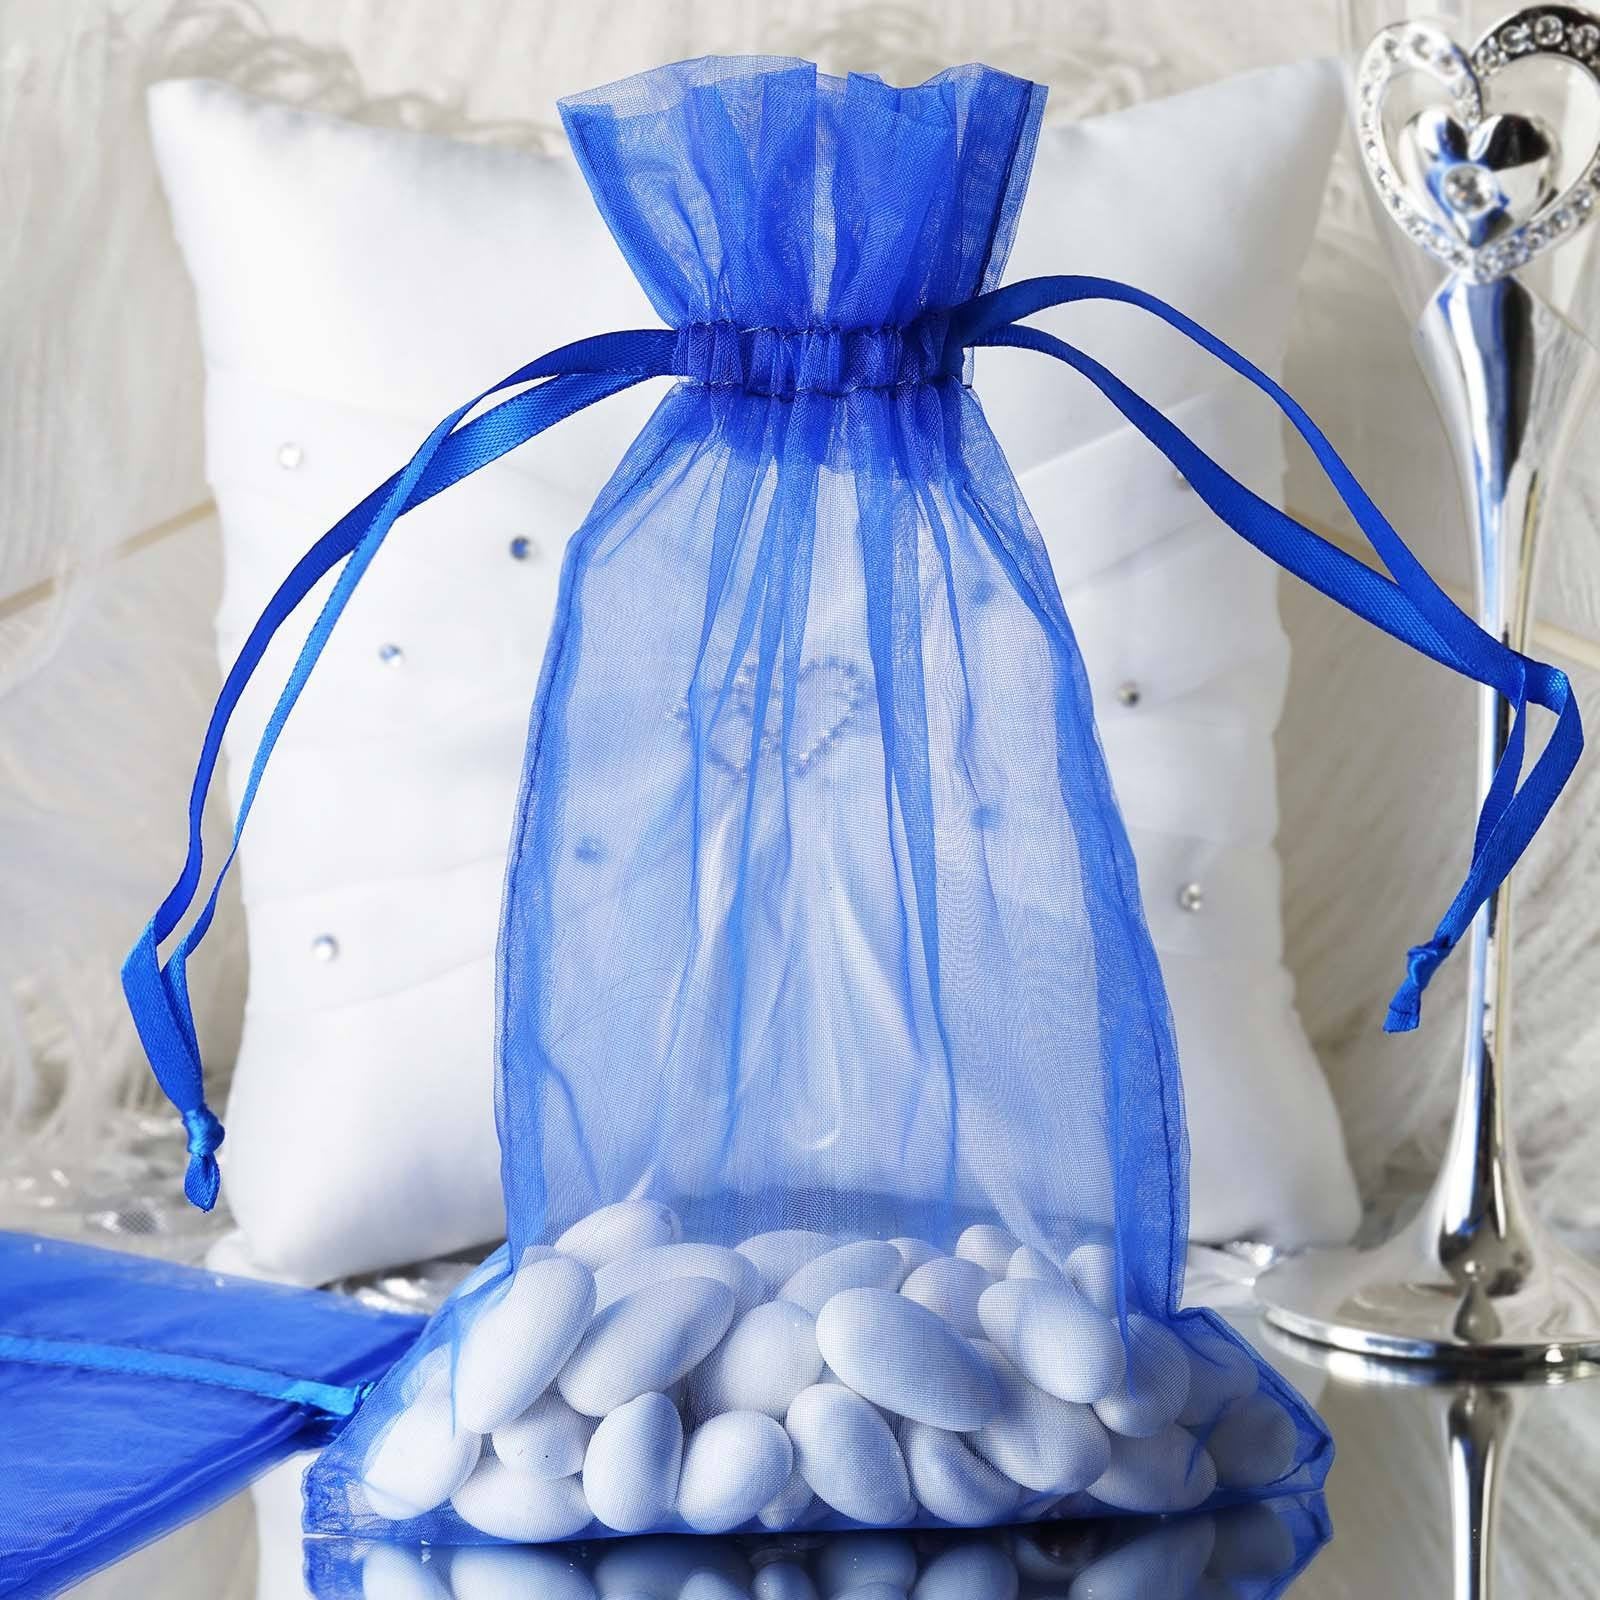 Efavormart 50PCS ROYAL BLUE Organza Gift Bag Drawstring Pouch Wedding Favors Bridal Shower Treat Jewelry Bags - 6"x9" - image 1 of 7